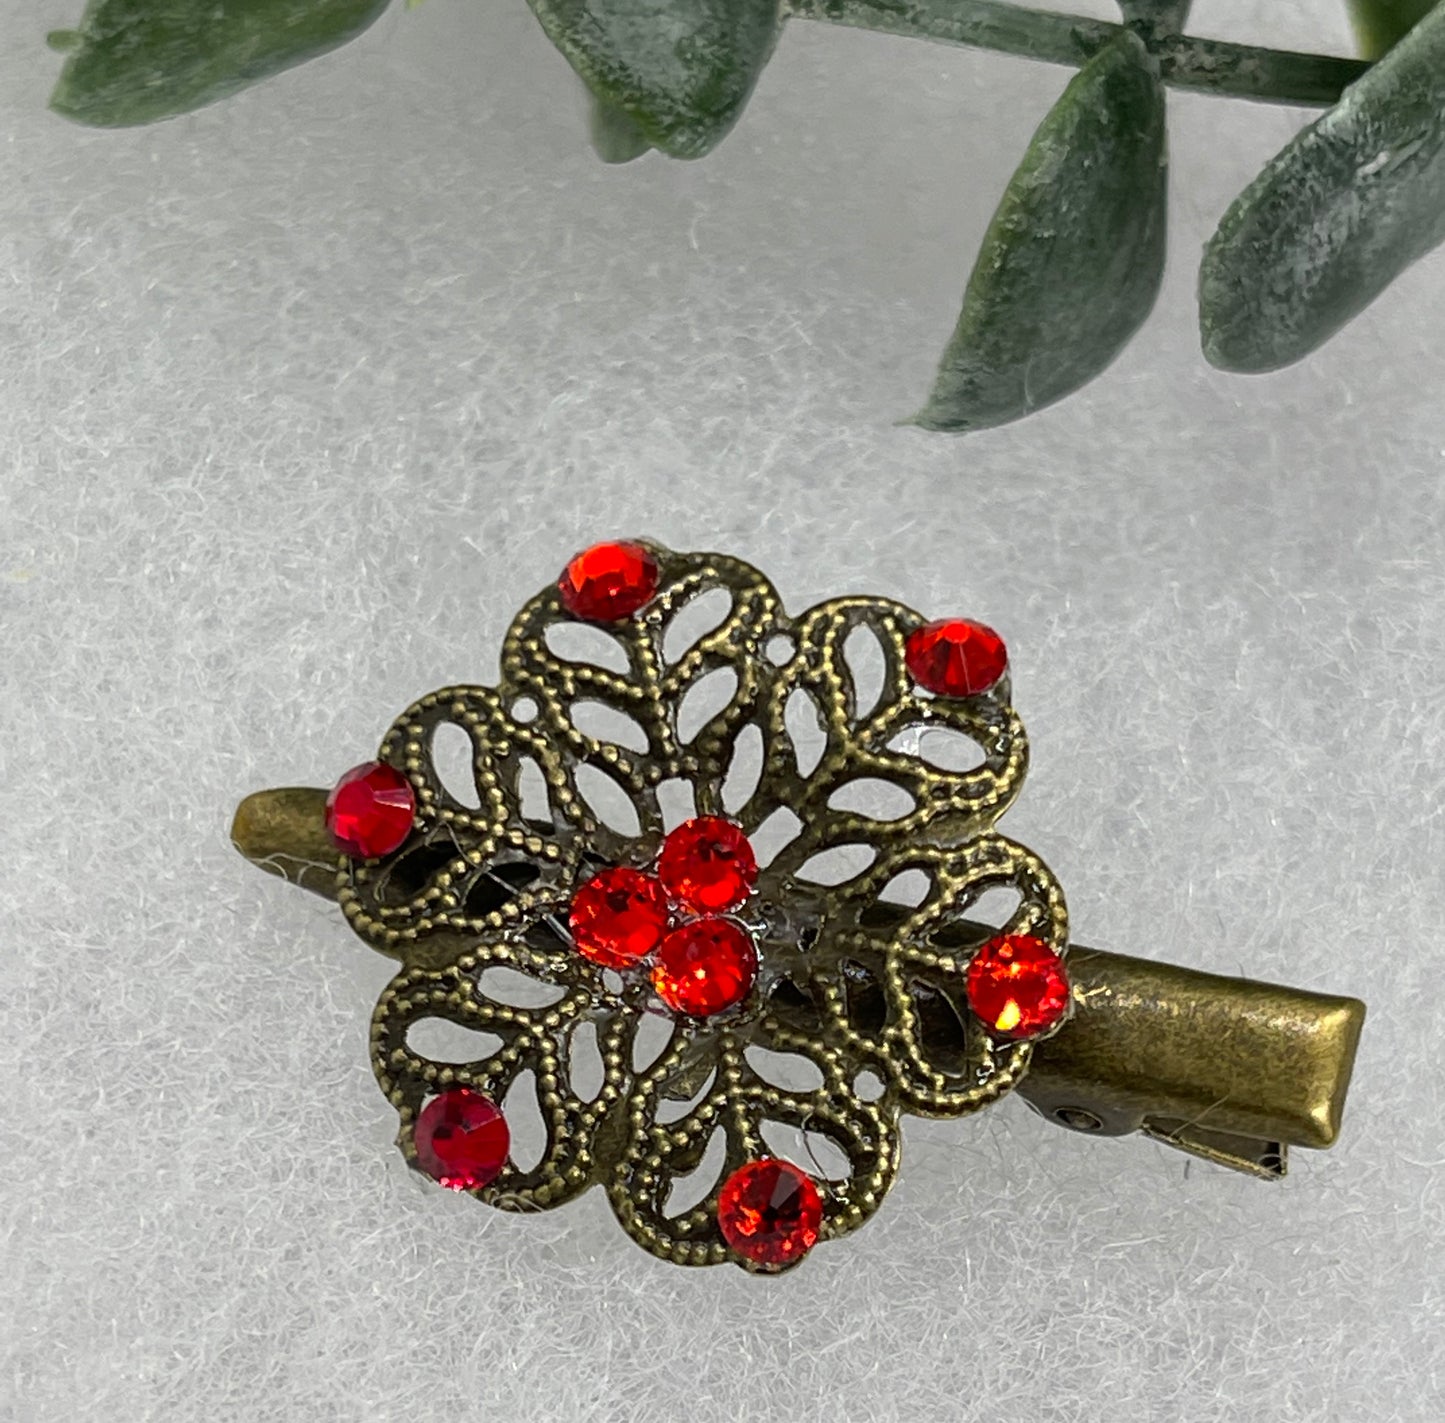 Ruby Red Crystal vintage antique style flower hair alligator clip approximately 2.0” long Handmade hair accessory bridal wedding Retro